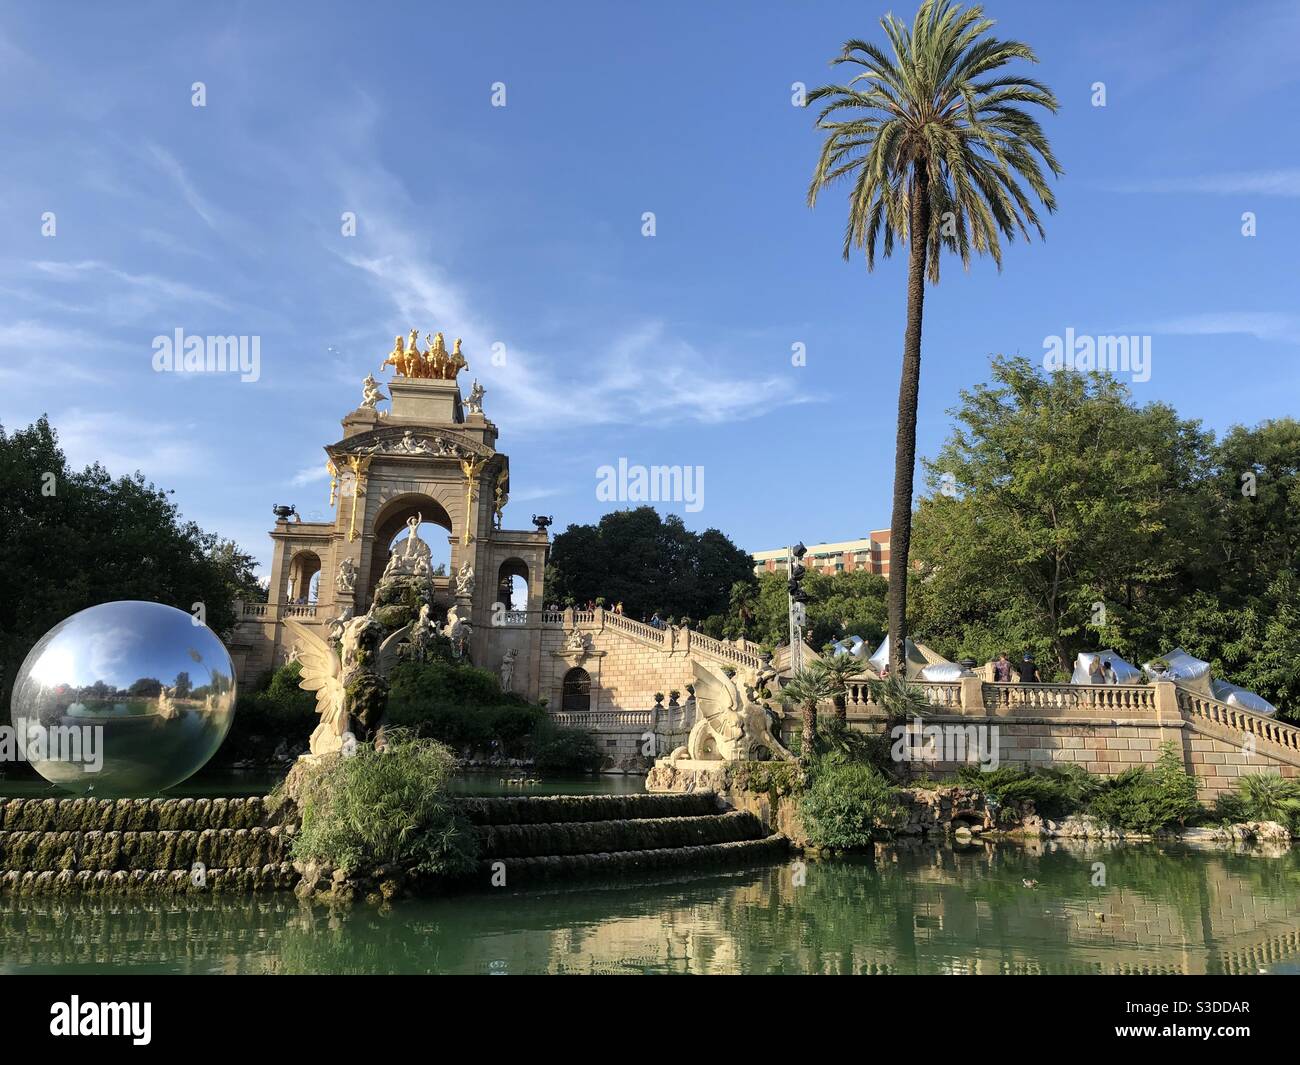 Giant silver sphere in the pond/ fountain at Citadel Park, Barcelona, Spain, Europe Stock Photo